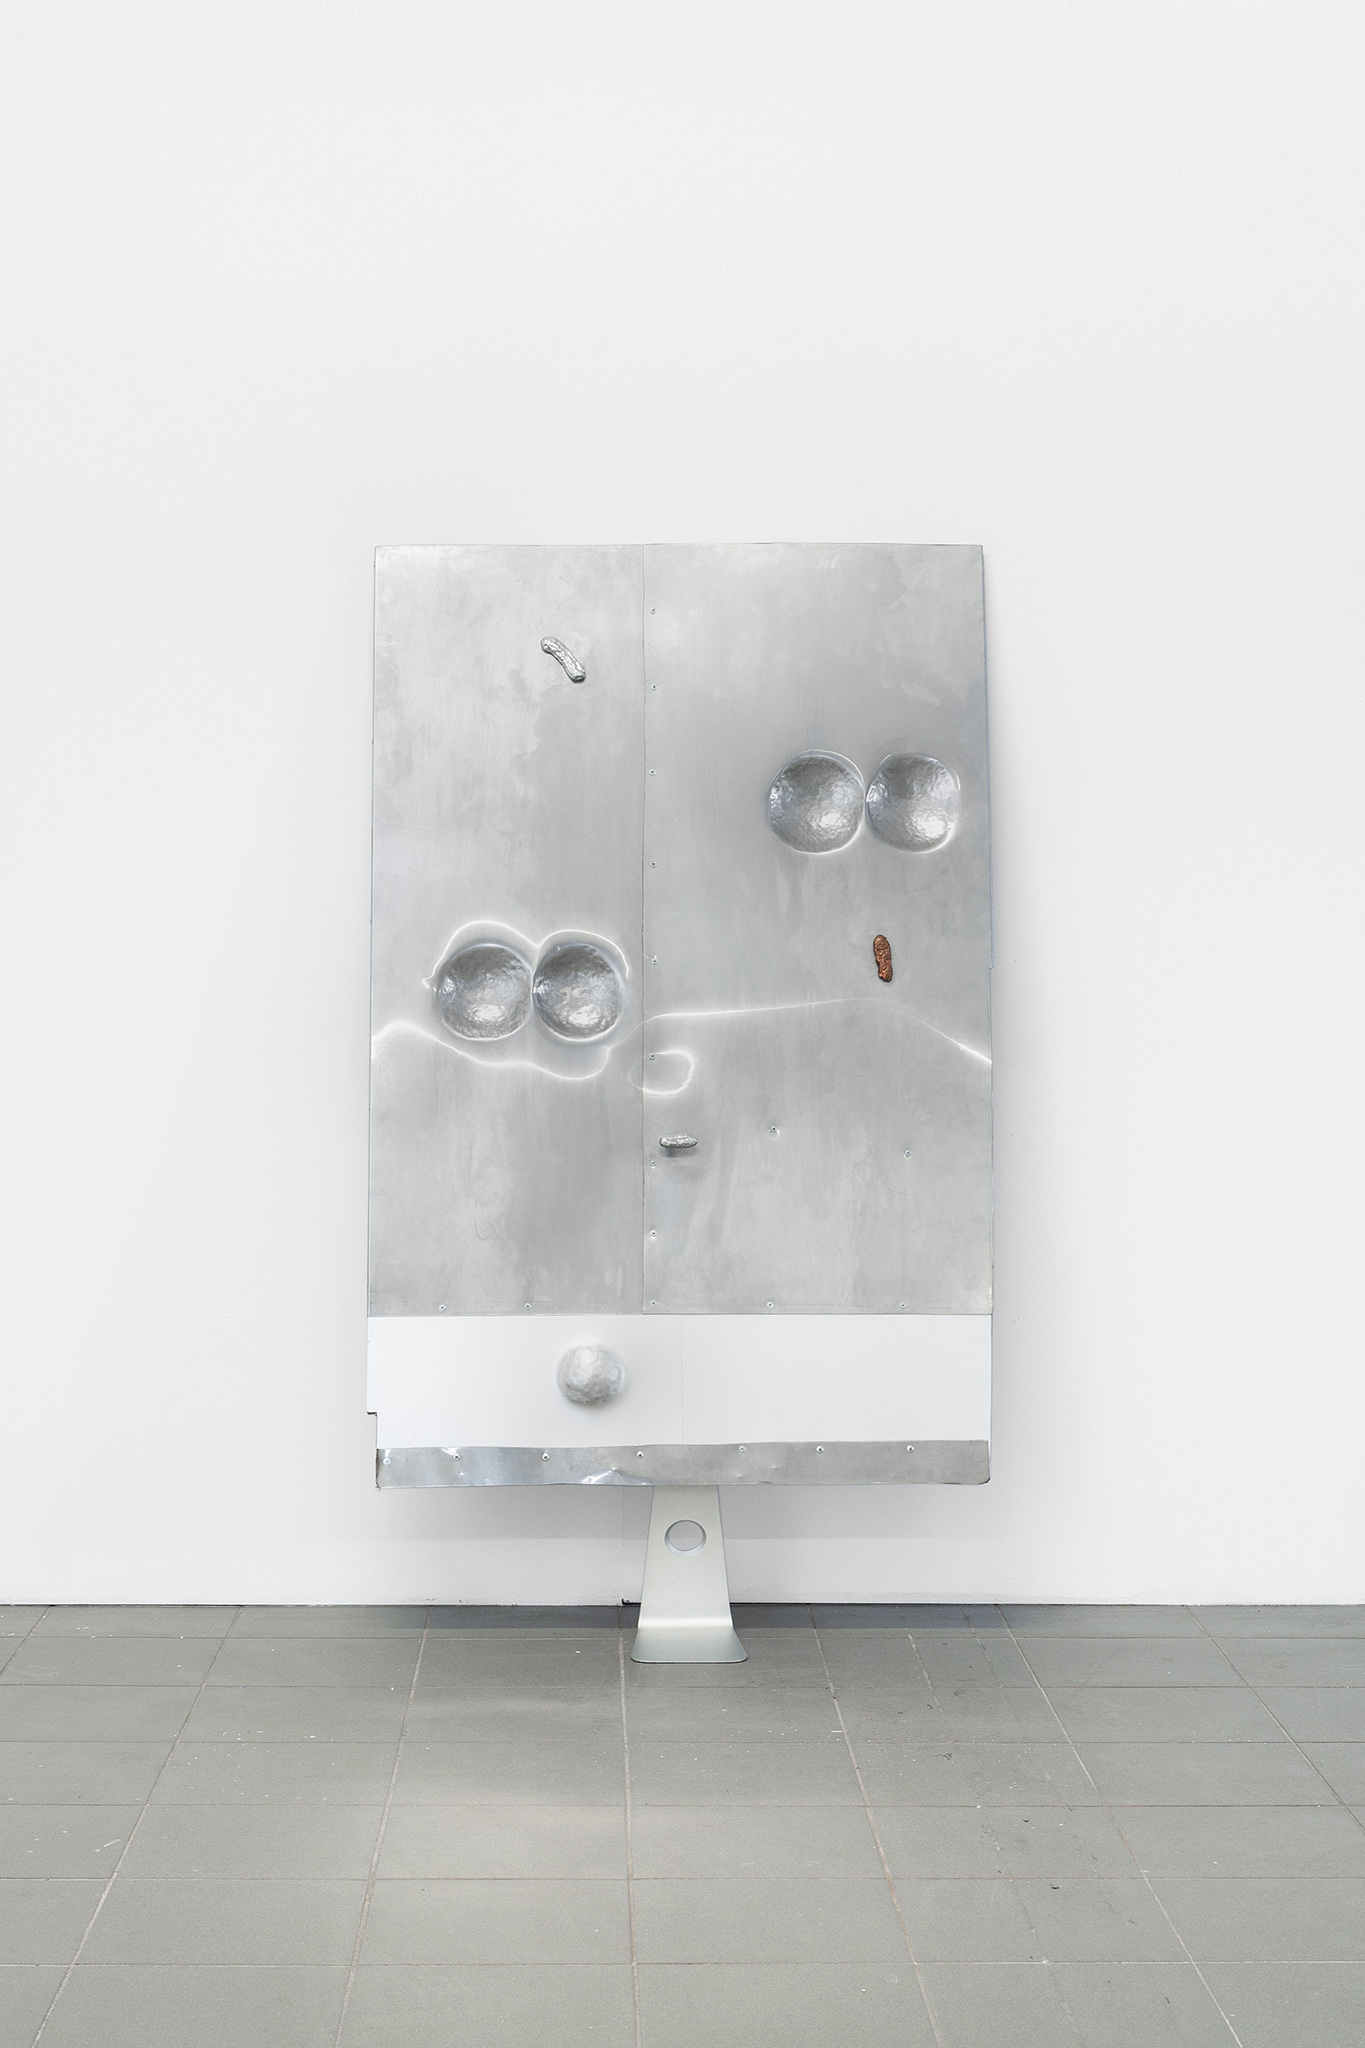 Matti Sumari, full time admin part time human, 2024, iMac foot, stainless steel from an illegal catering operation, plywood, aluminium, bronze, cast with metals found from dump sites